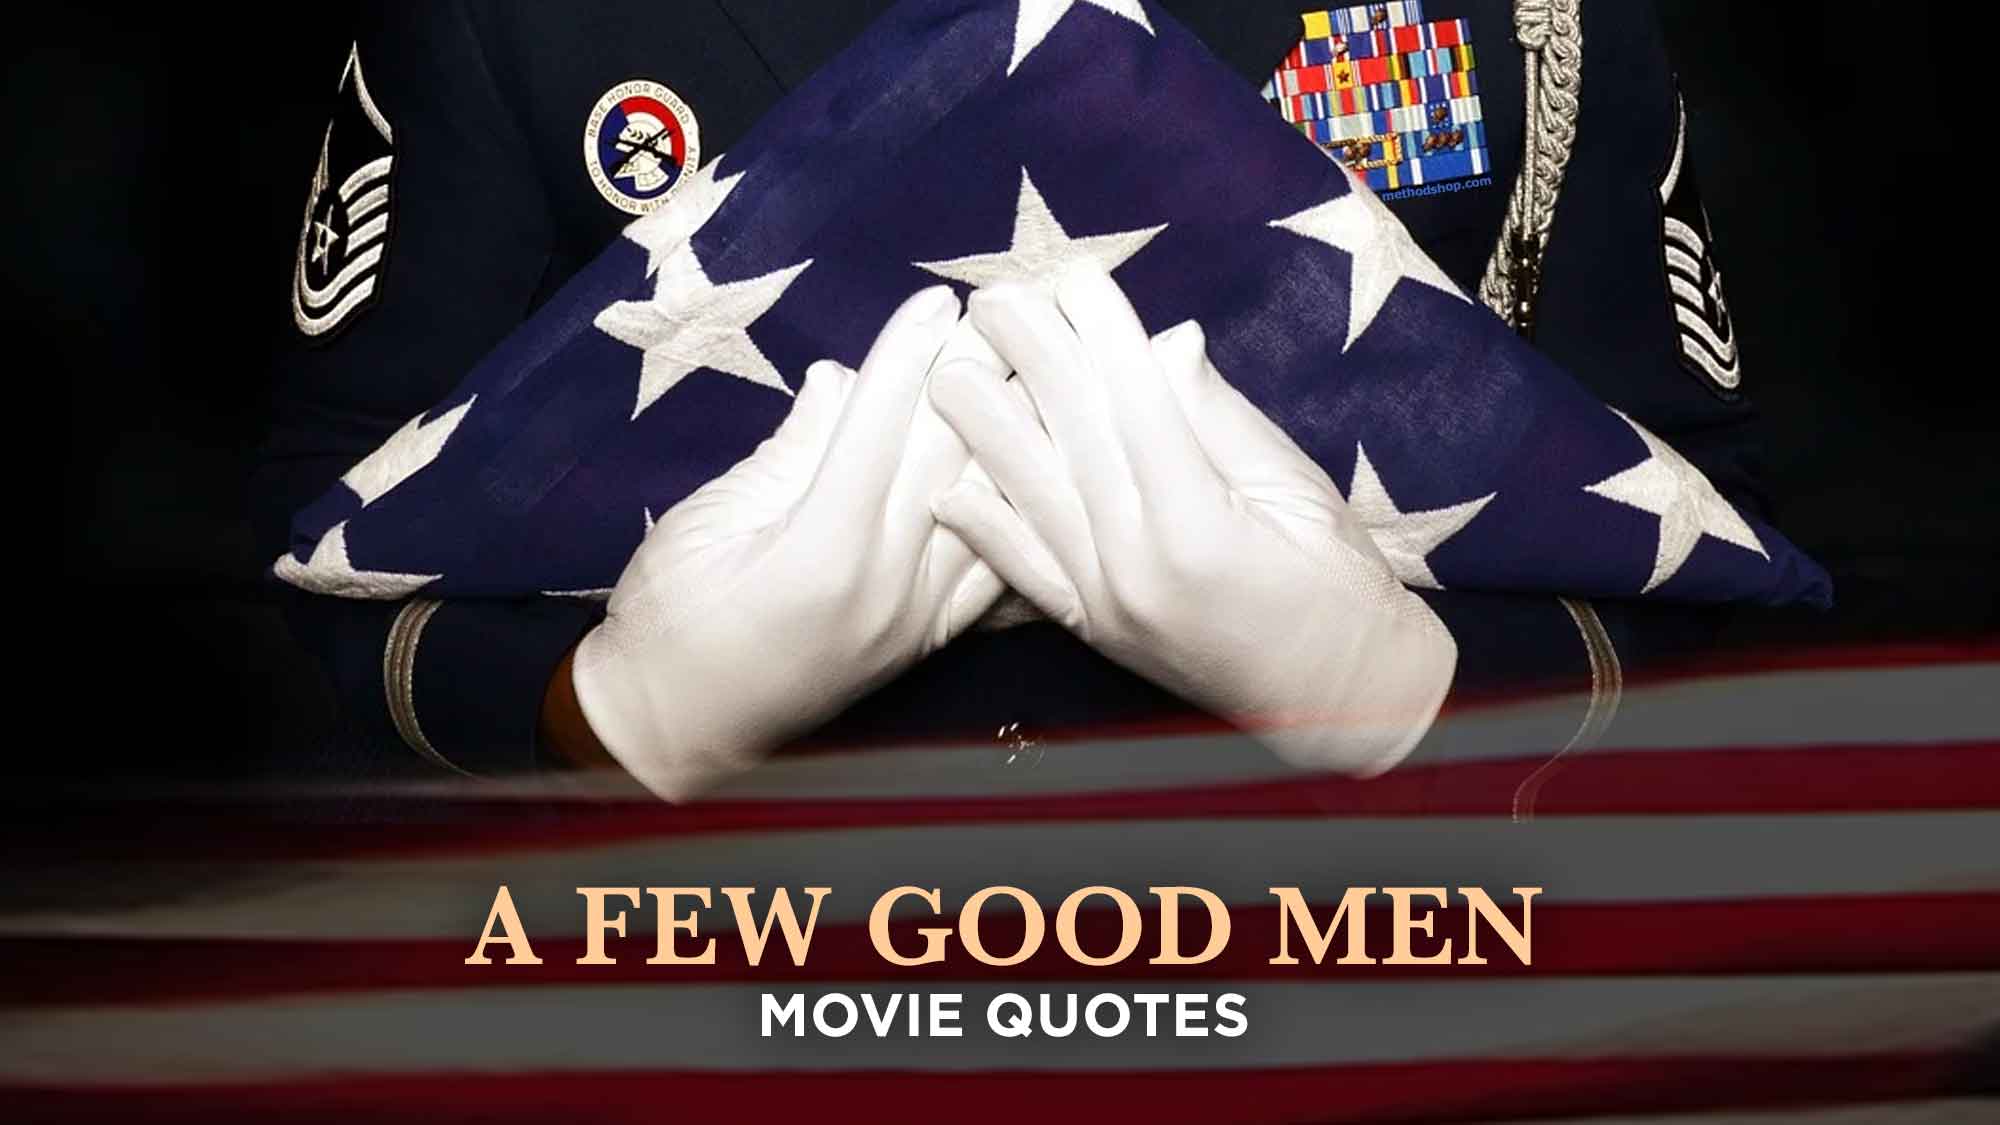 A Few Good Men Quotes: The 12 Most Dramatic Quotes From The Film